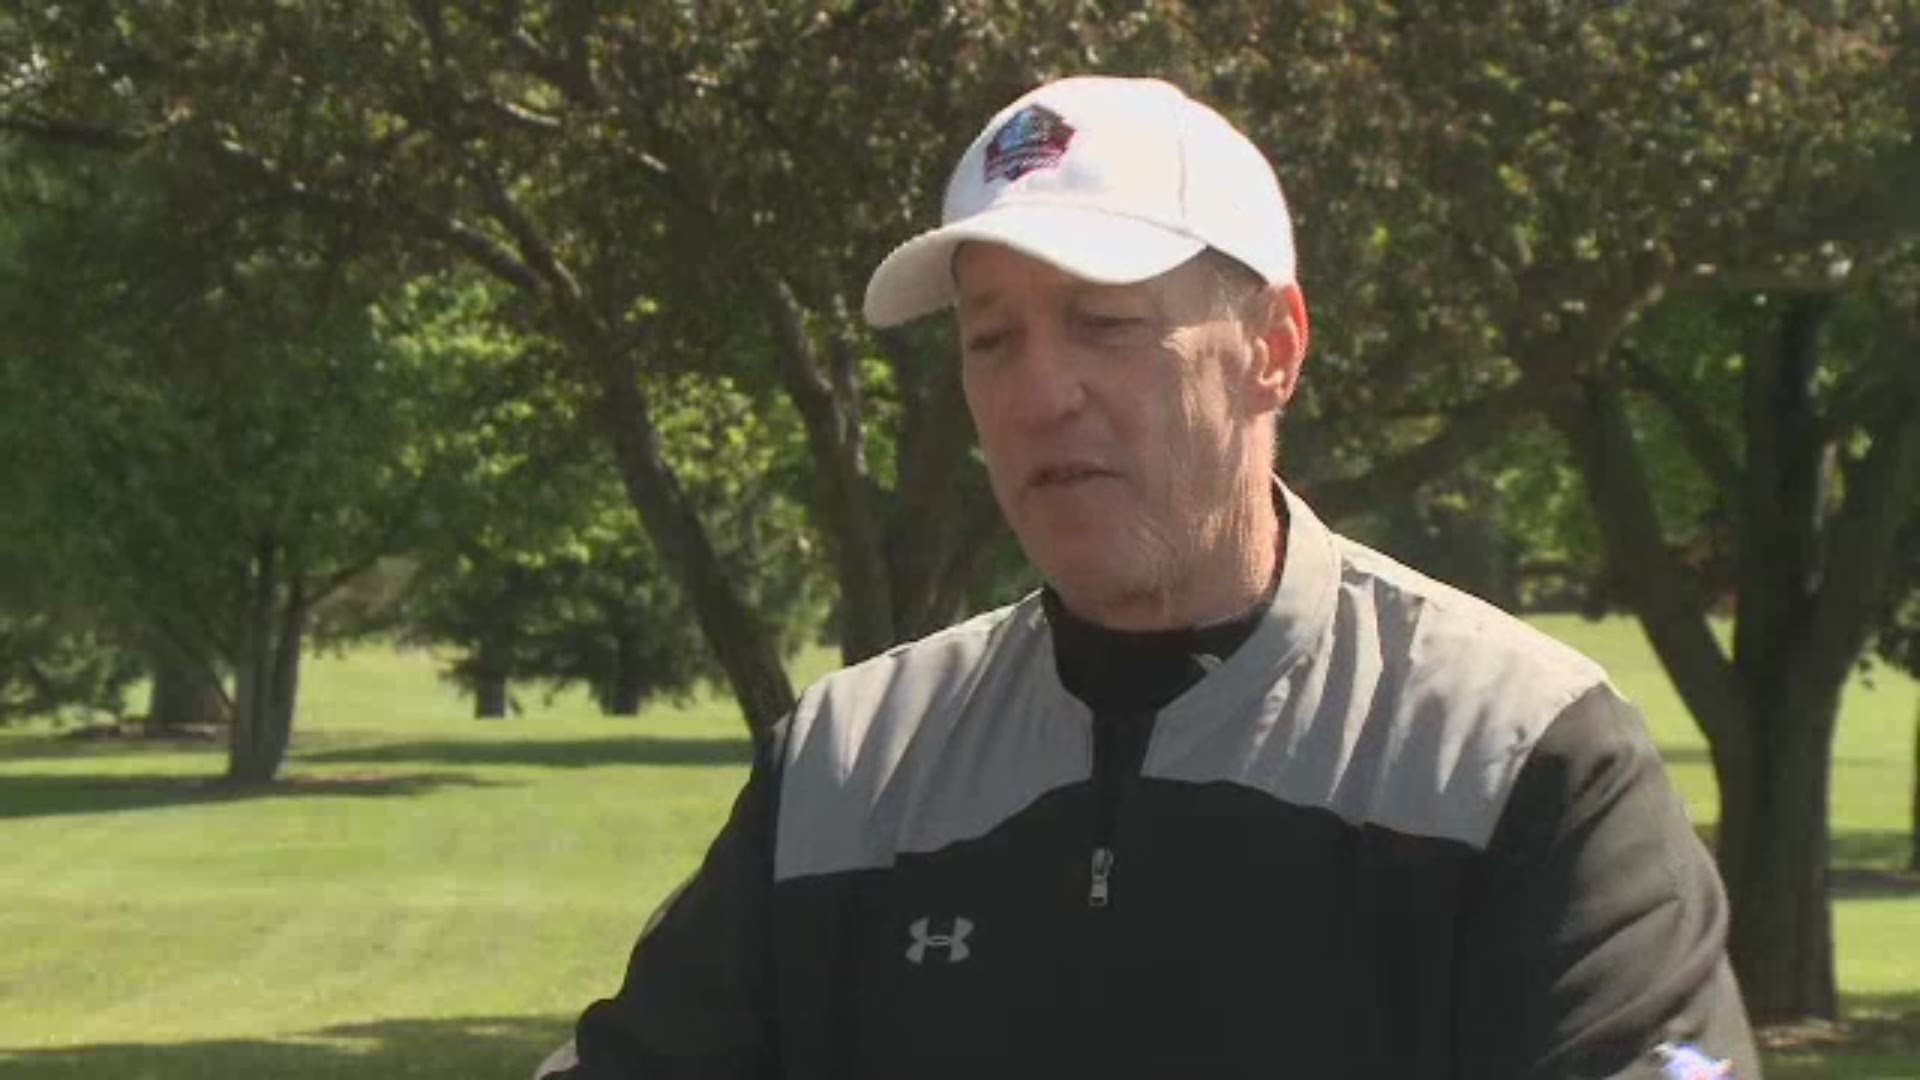 Jim Kelly on beating cancer and raising money for charity.